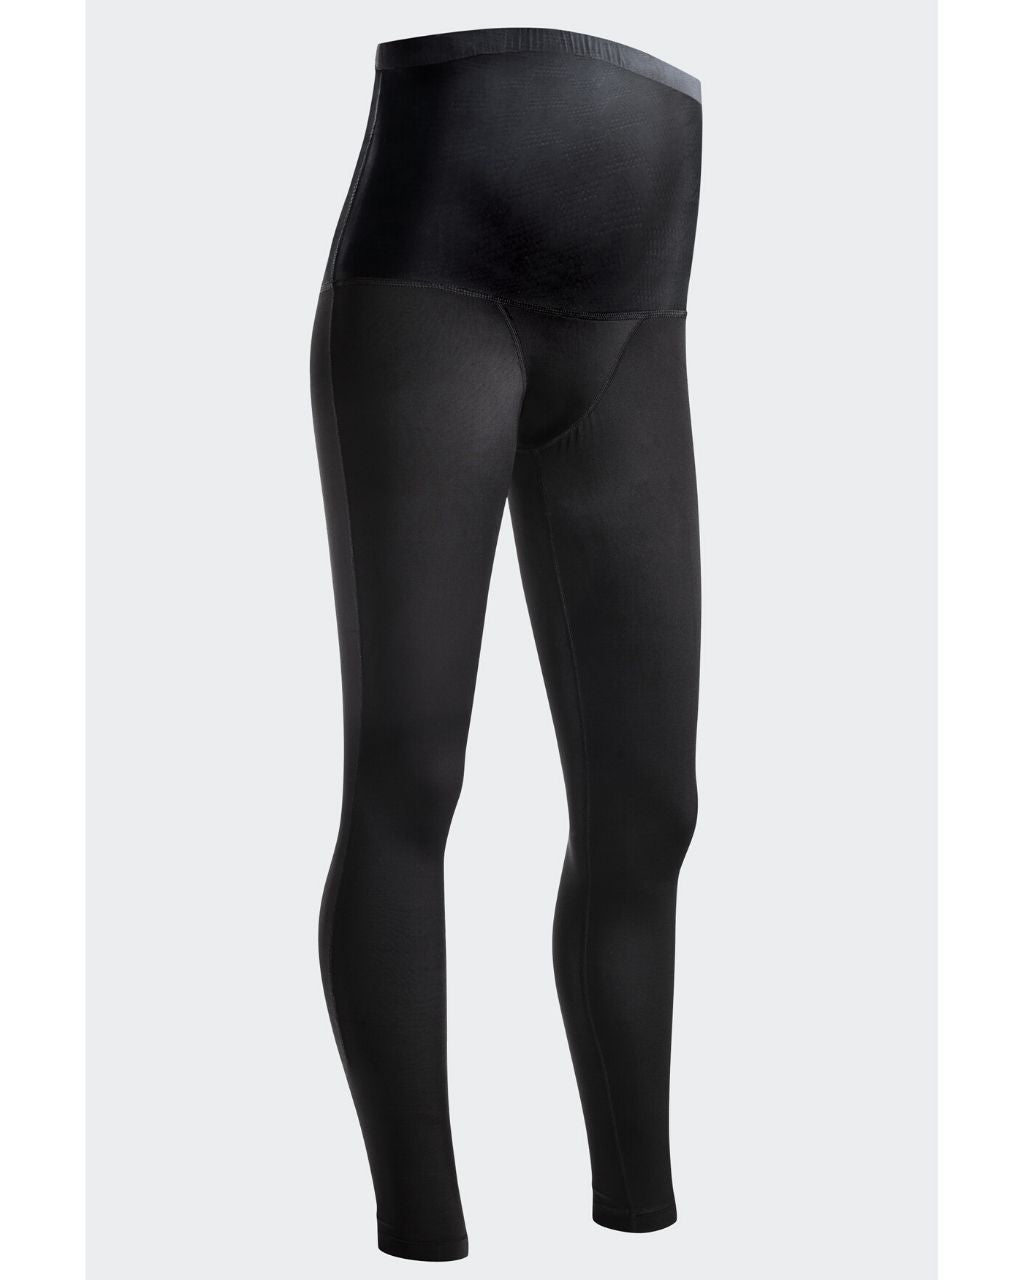 Not All Maternity Leggings Are Created Equal – SRC Health